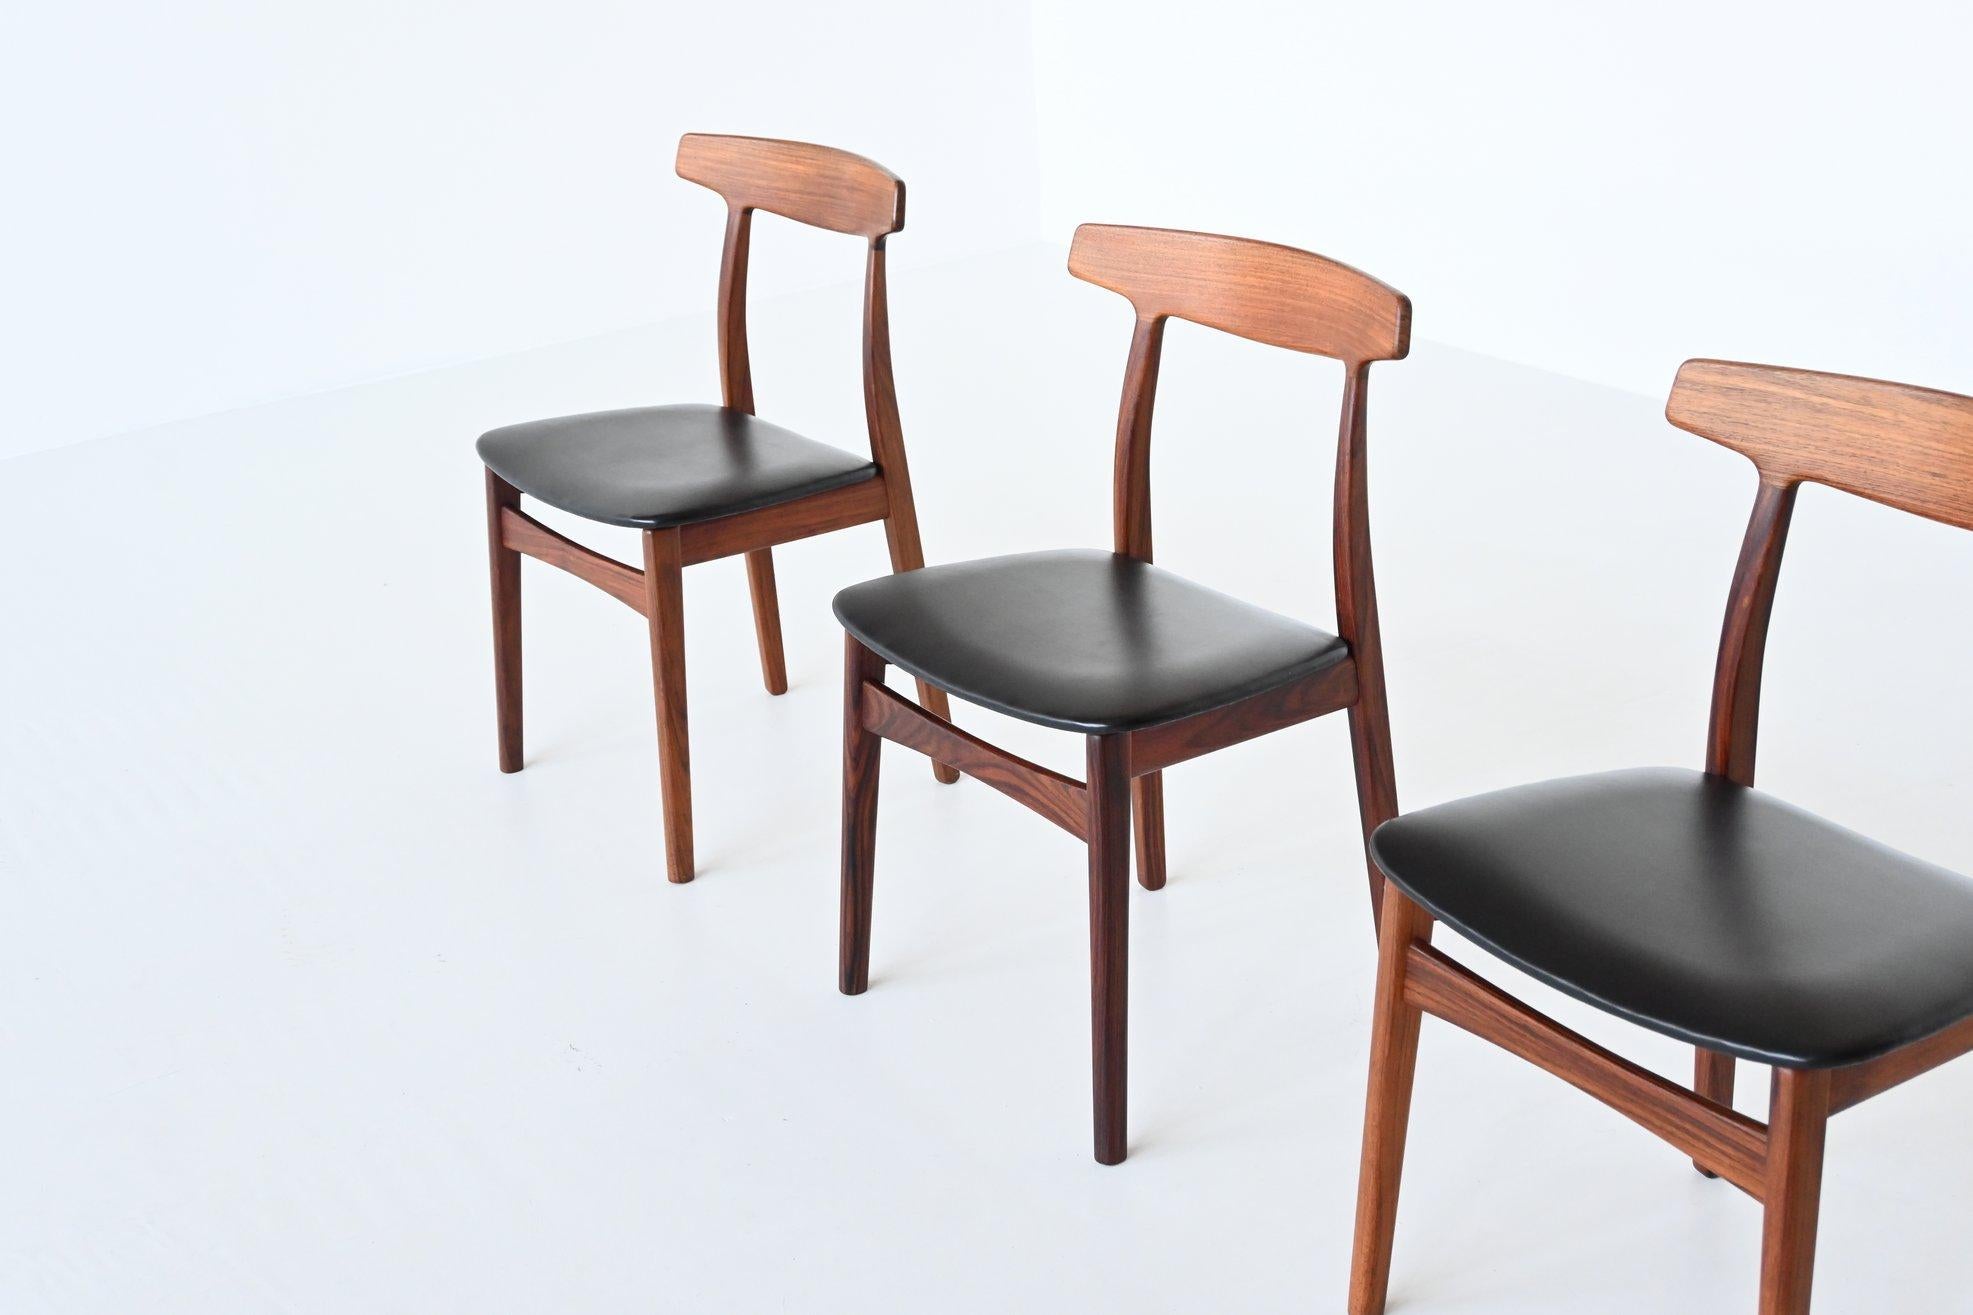 Beautiful shaped set of four dining chairs model 60 designed by Henning Kjaernulf and manufactured by Bruno Hansen, Denmark 1962. These chairs are made of beautiful grained solid rosewood and are upholstered with black faux leather. All of them are